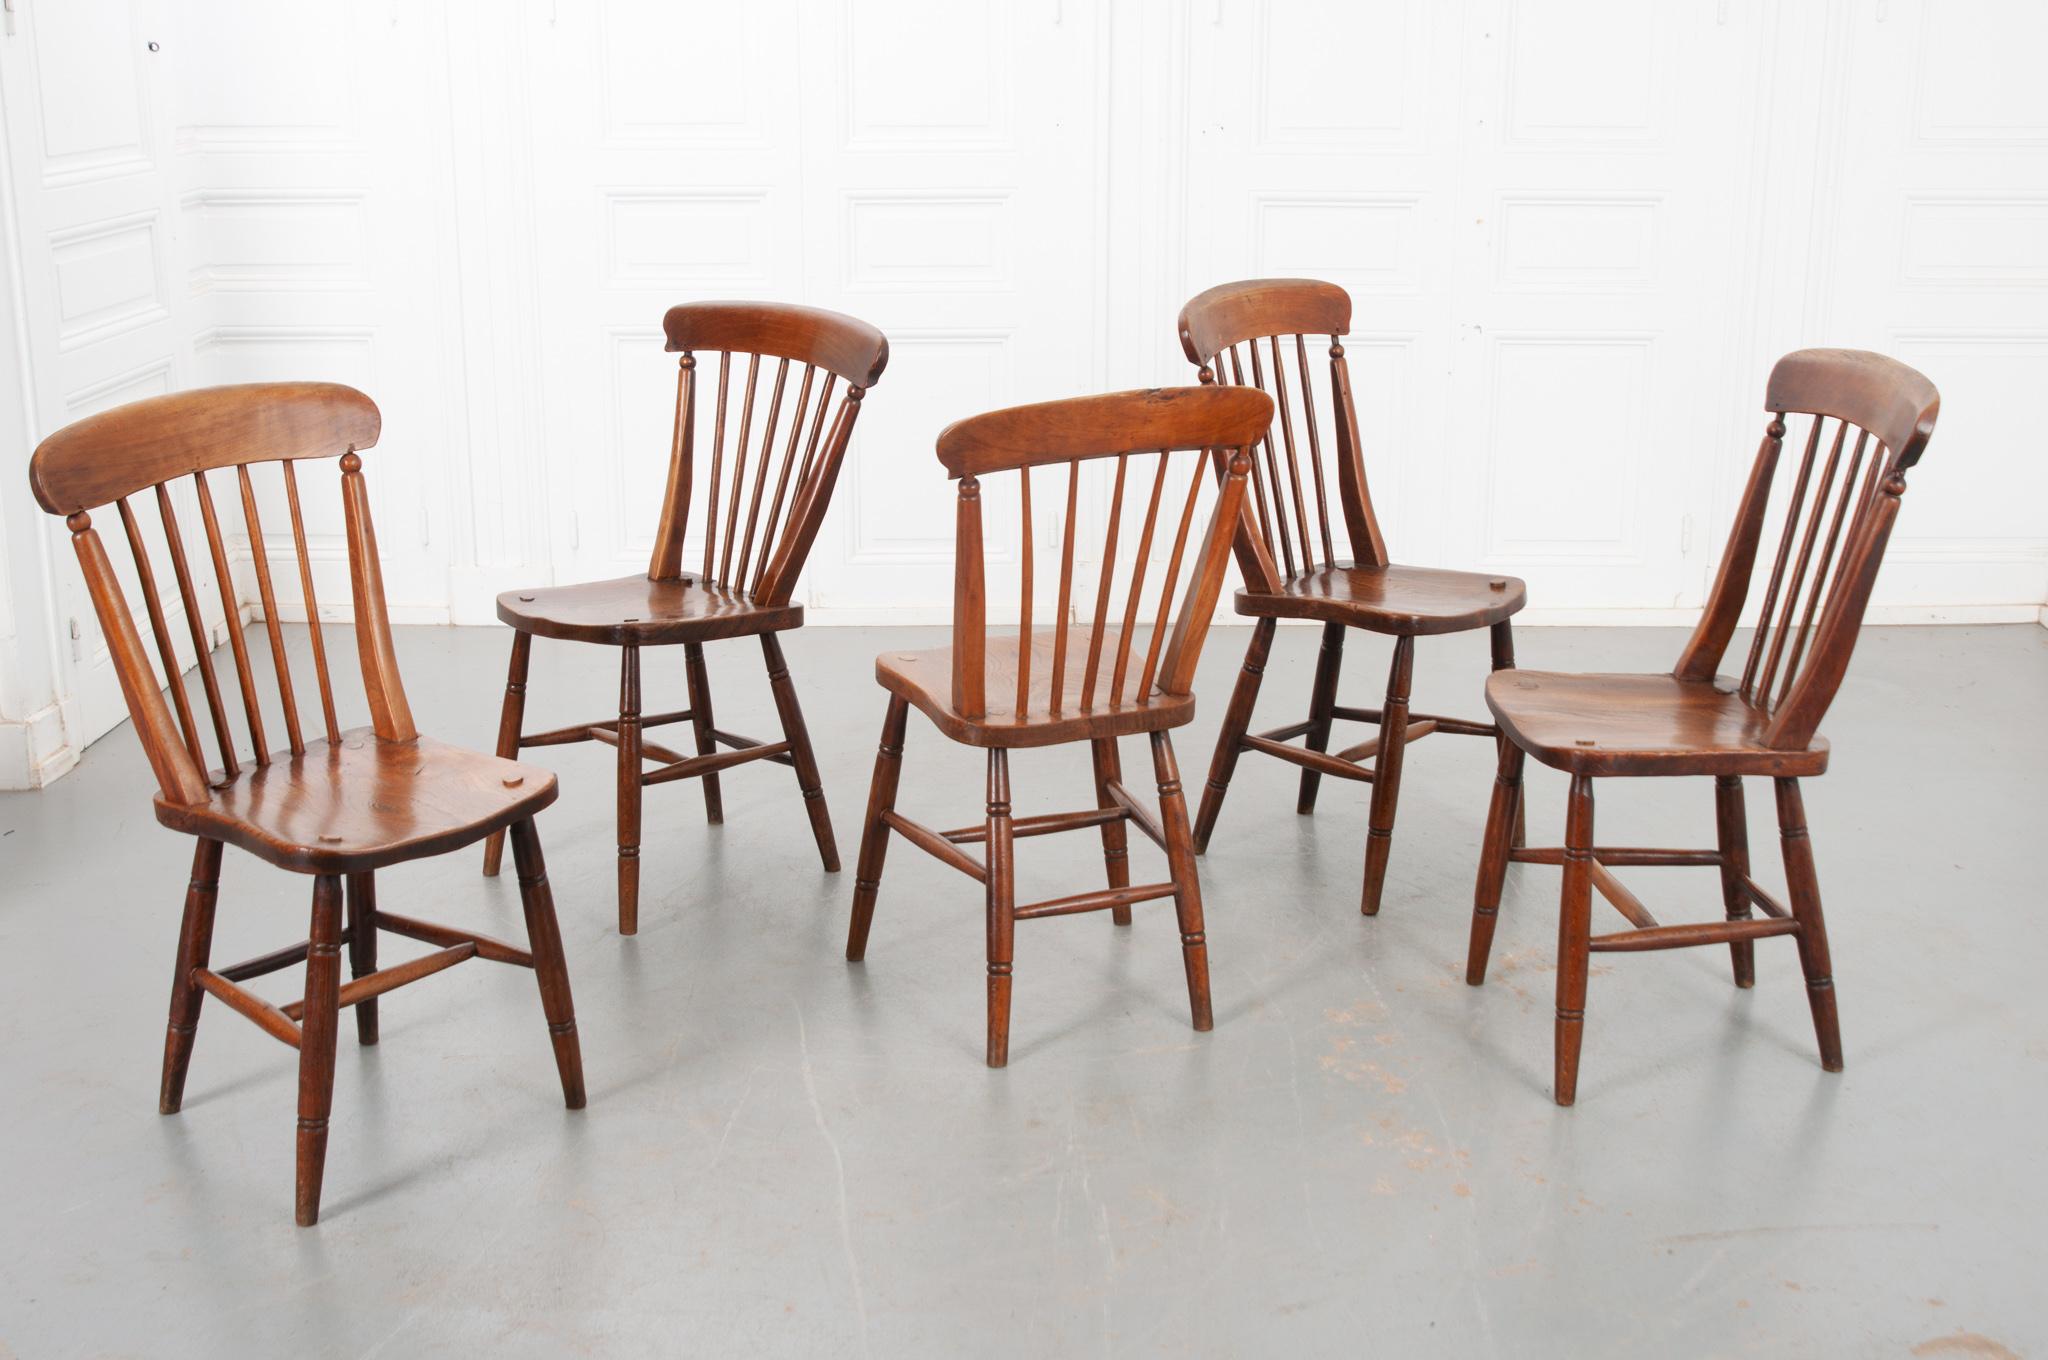 This classic set of five dining chairs was crafted in England, circa 1860. Cleaned and polished with French wax paste. The wonderfully patinated solid oak proves to be incredibly sturdy after nearly 200 years, giving them the ability to withstand